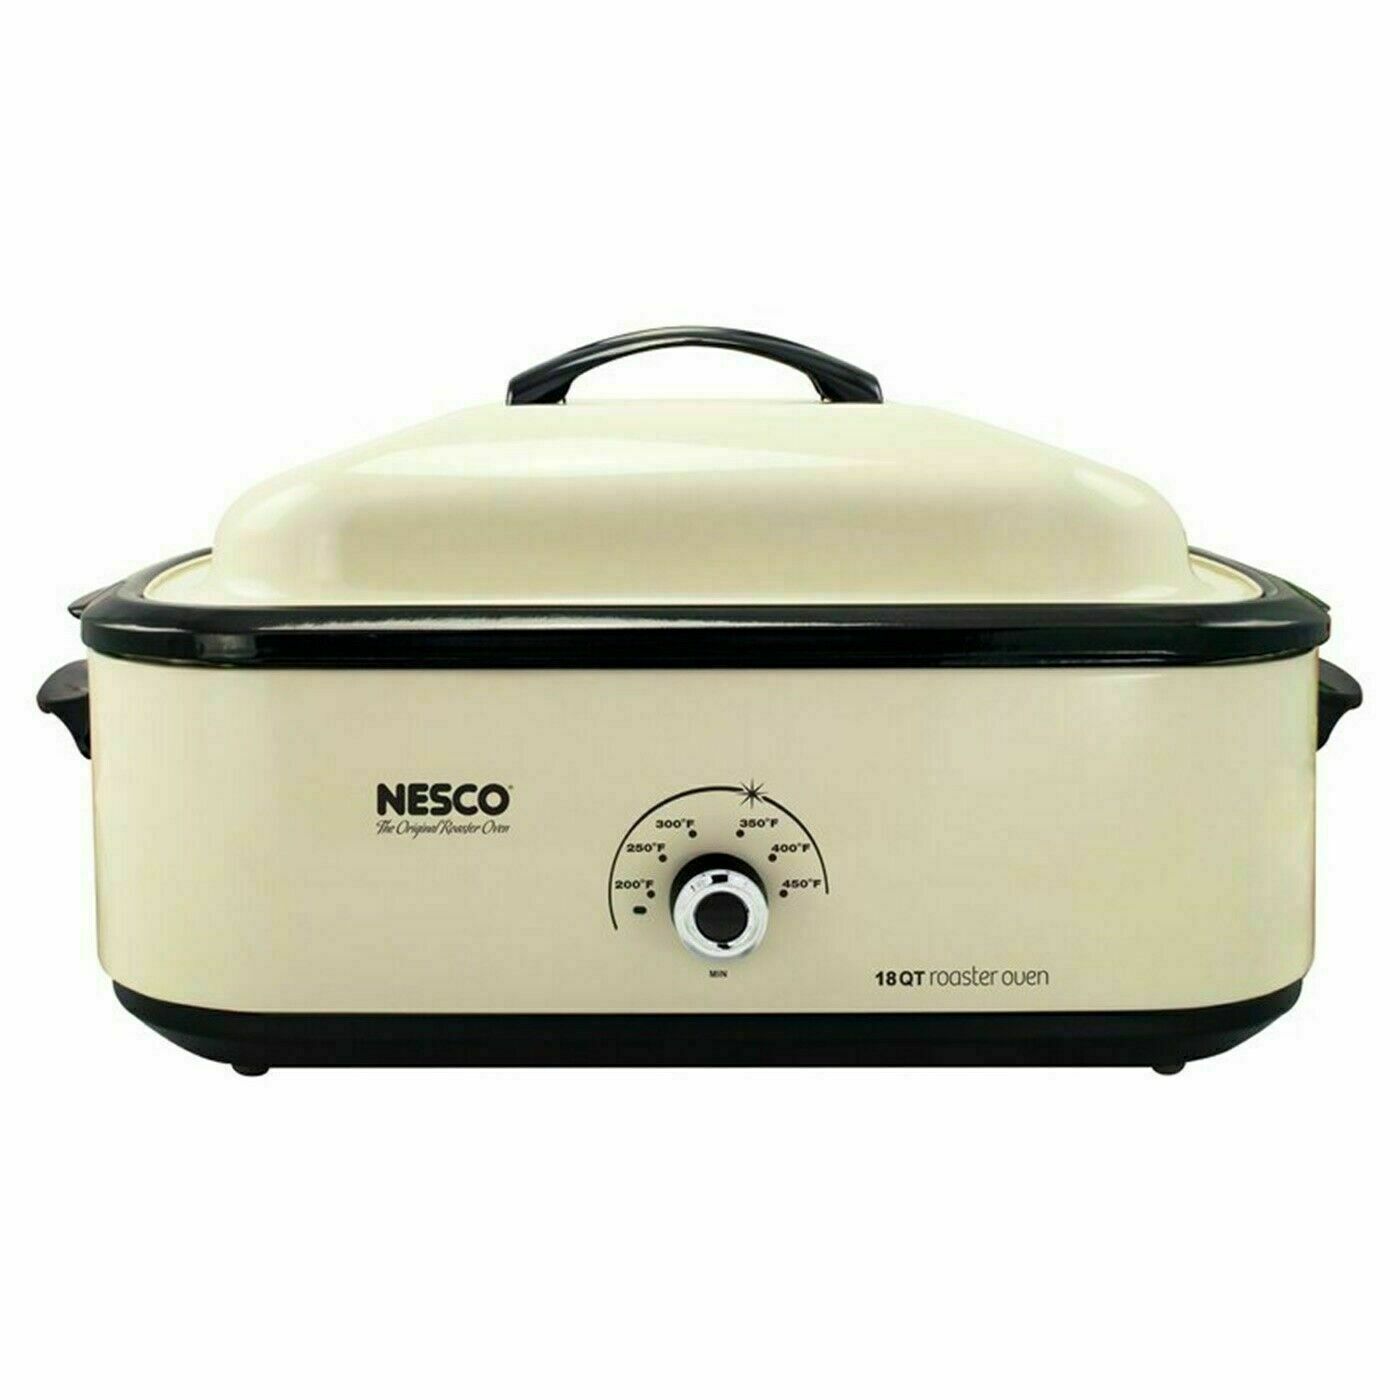 Nesco 4818-14 18 Quart Classic Roaster Oven Kitchen Appliance Dining Slow Cooker-Roaster Oven and slow cooker-AULEY